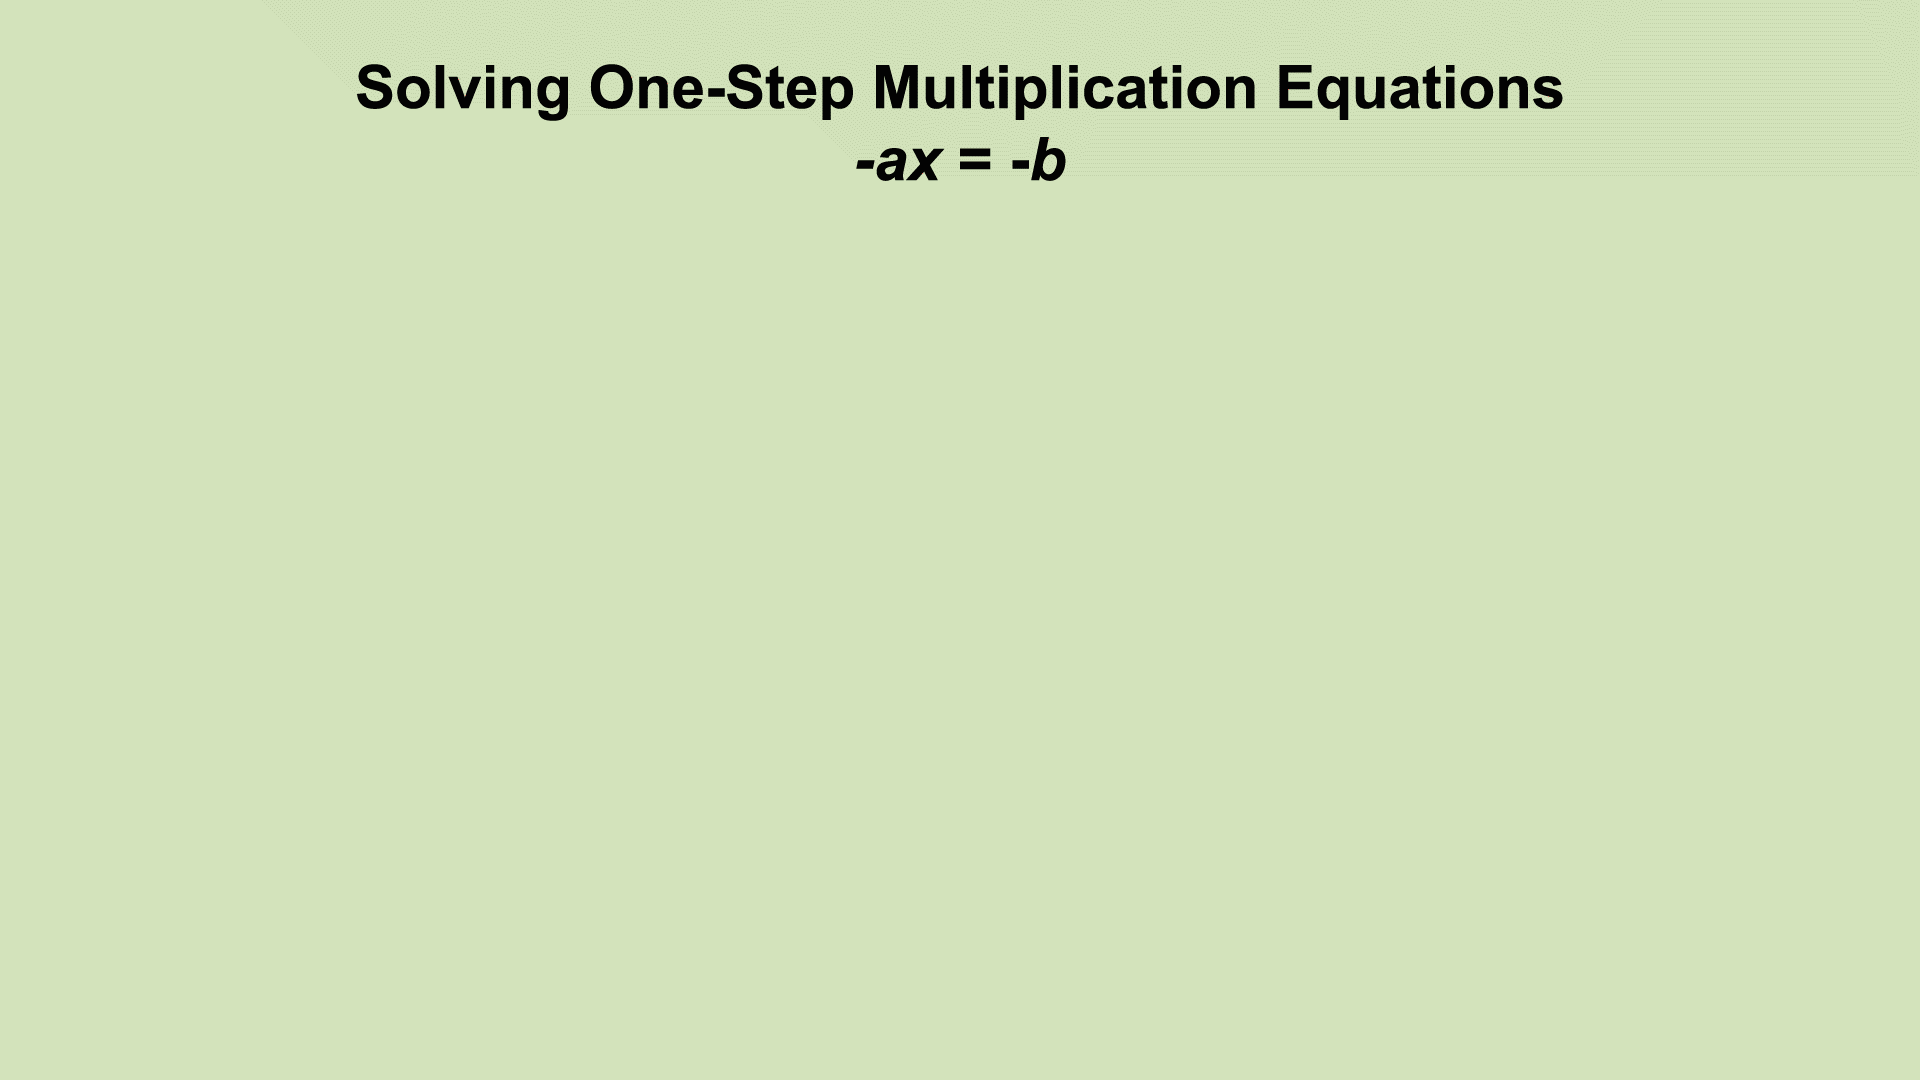 In this example the one-step equation shows multiplication by a negative number.